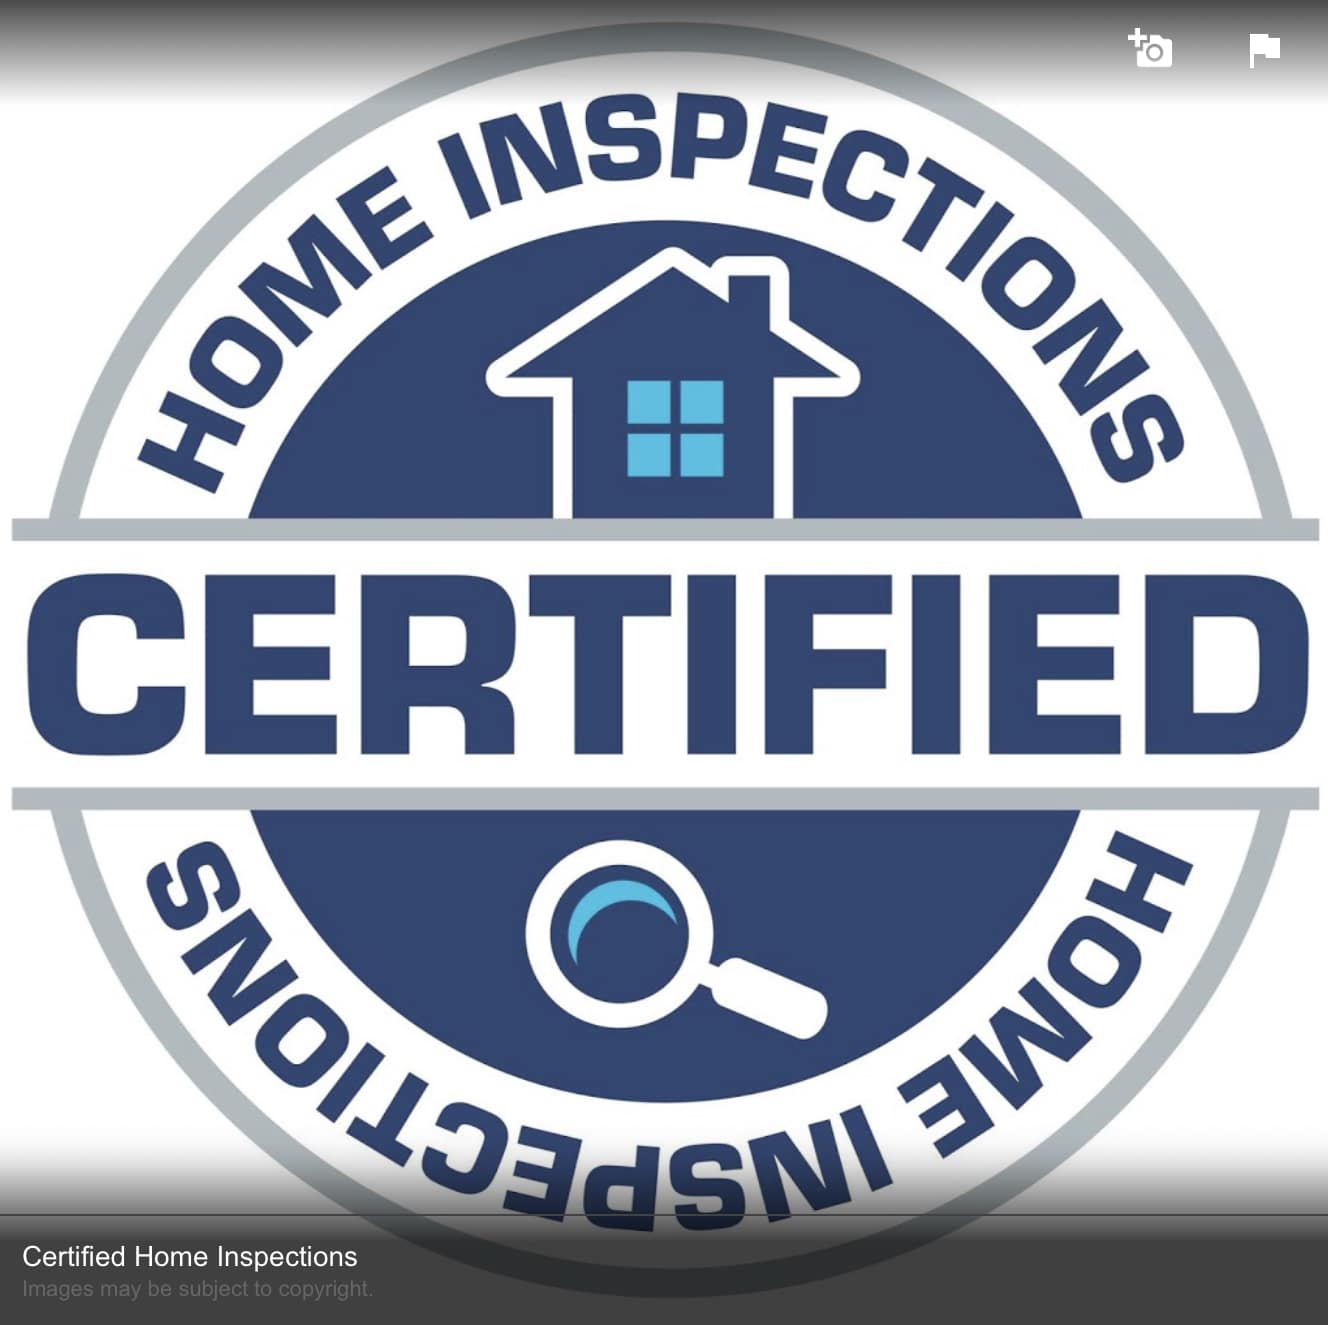 THE IMPORTANCE OF PEST AND BUILDING INSPECTIONS